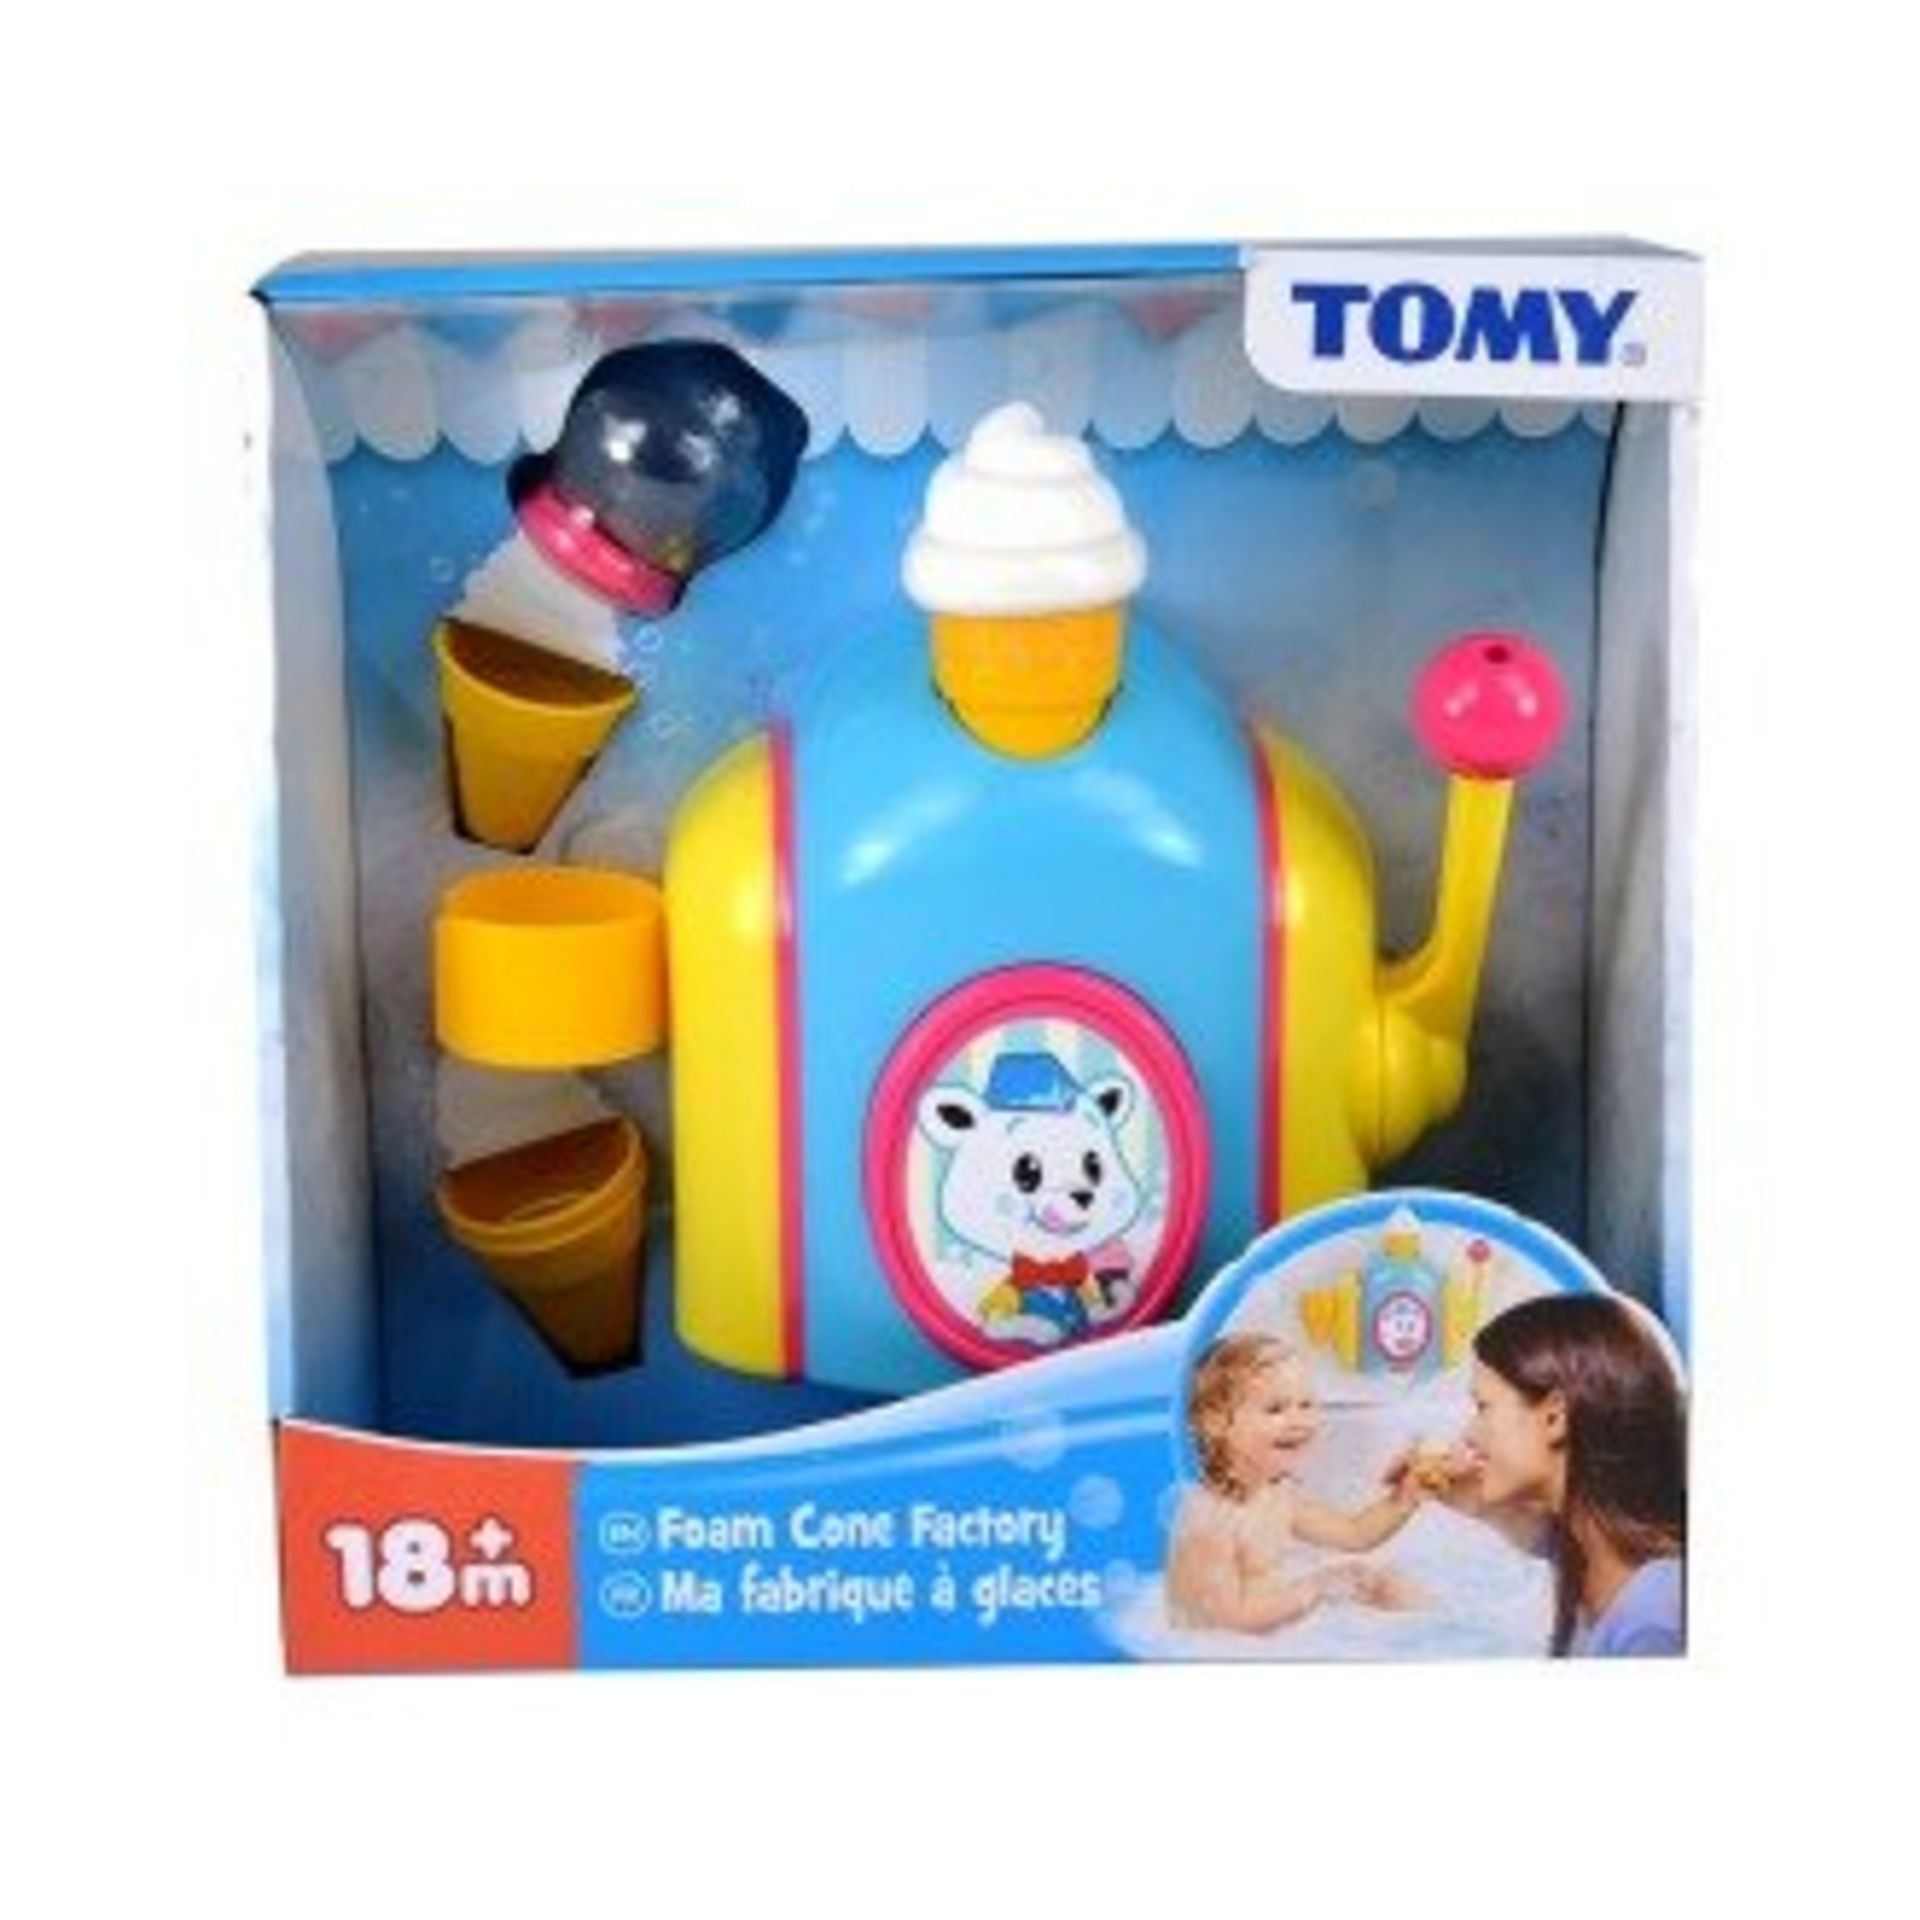 97 x Family Games & Toys products as listed | RRP £ 2002 - Image 2 of 7